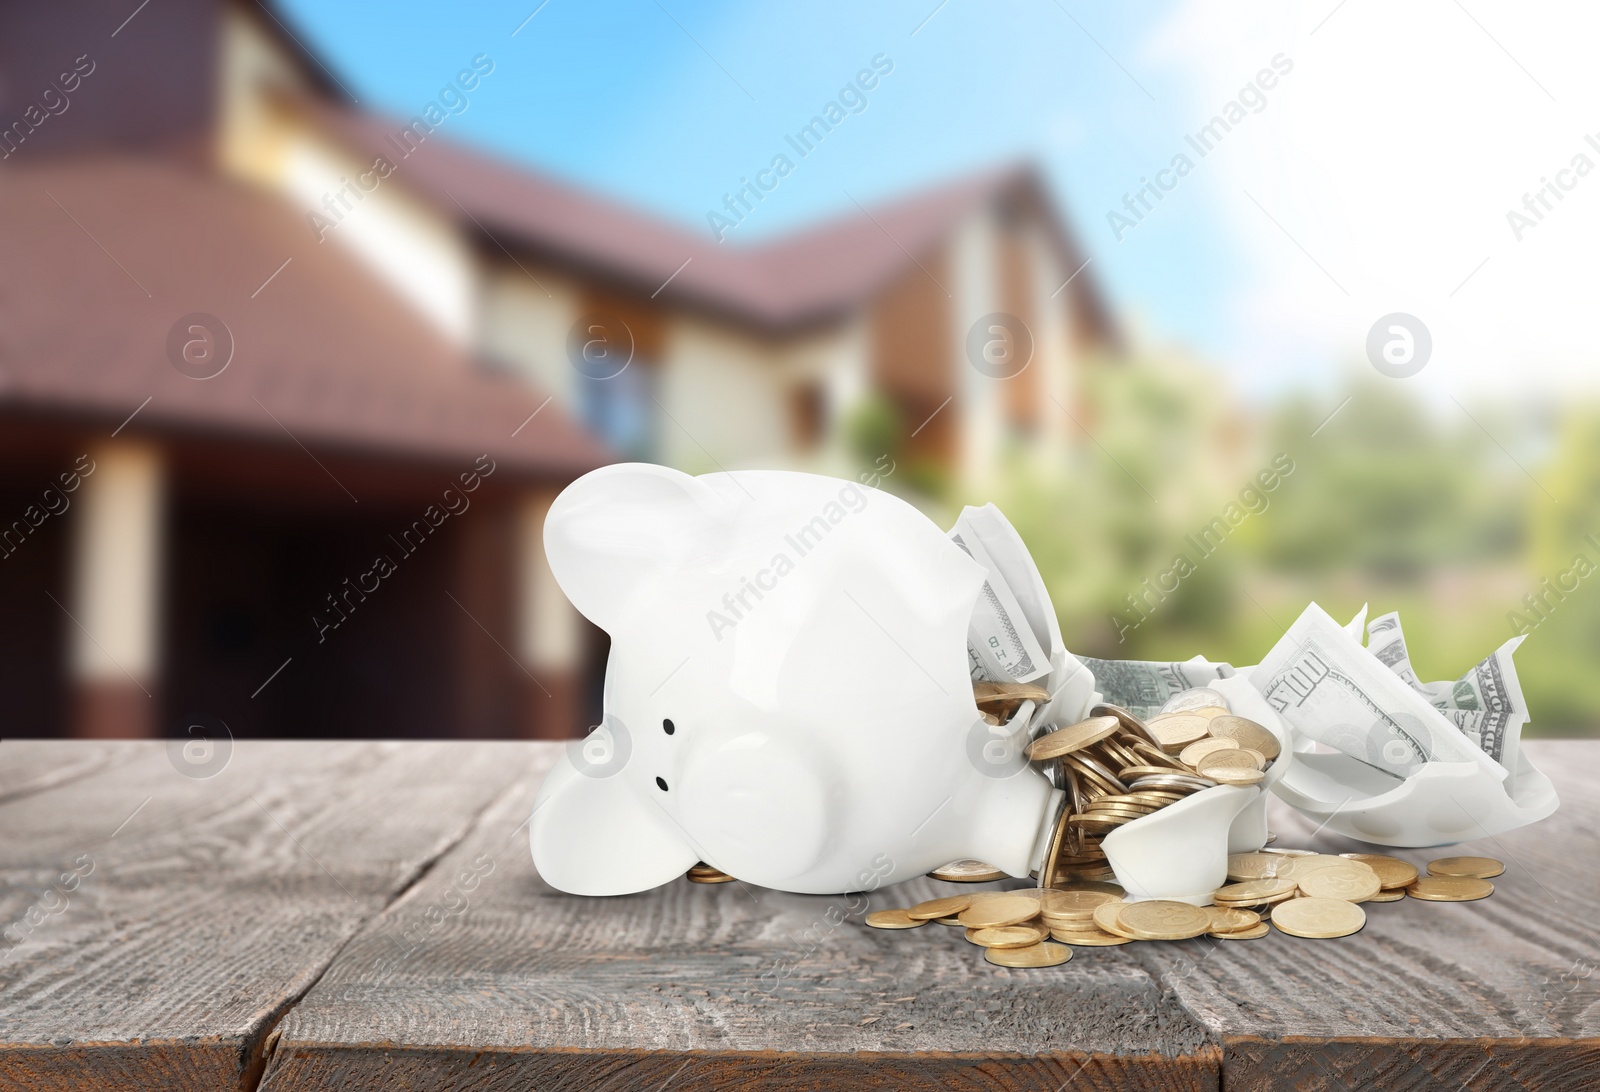 Image of Broken piggy bank with money on wooden surface and blurred view of beautiful house. Mortgage concept